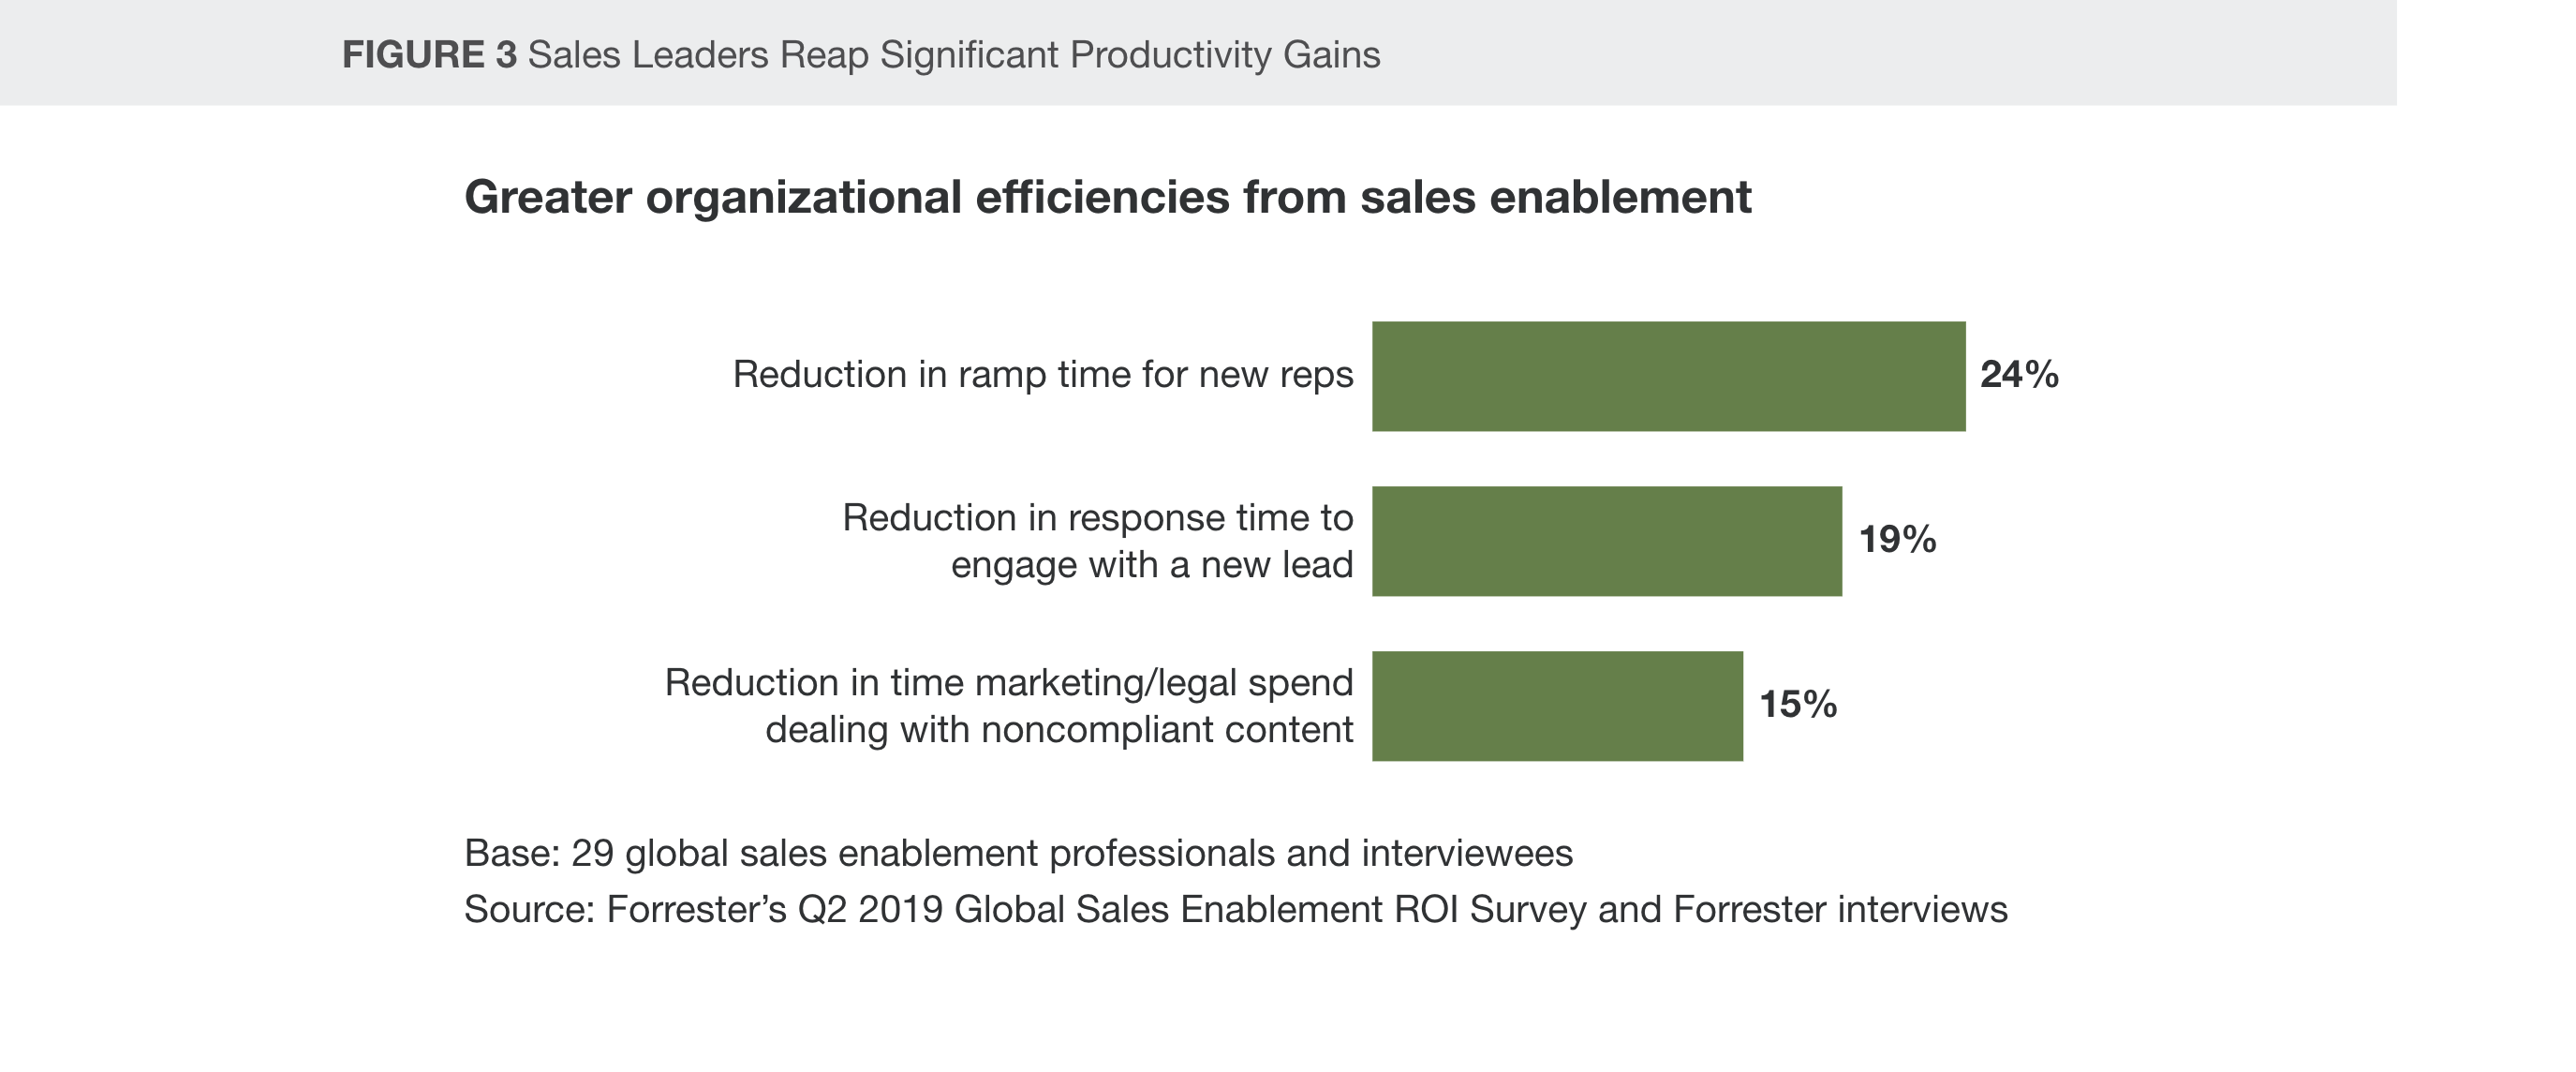 greater organizational efficiencies from sales enablement